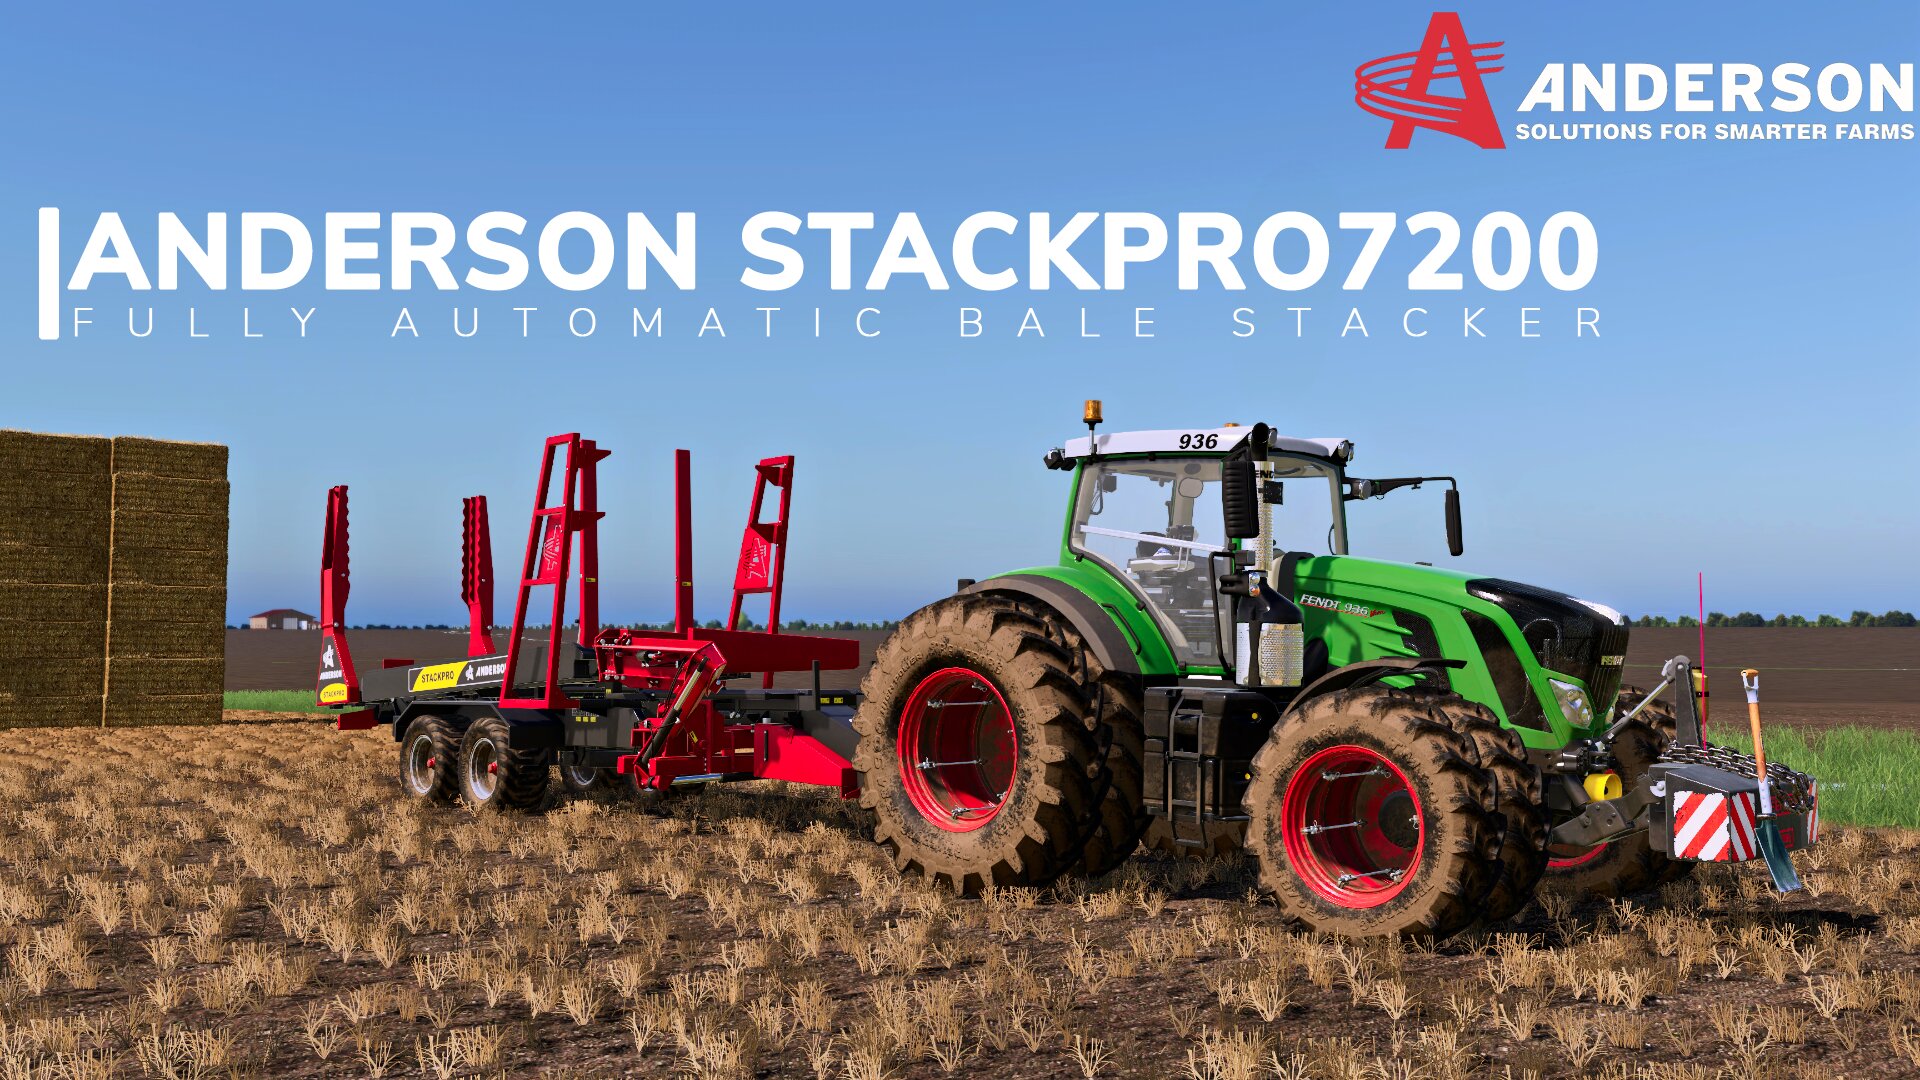 Anderson Stackpro7200